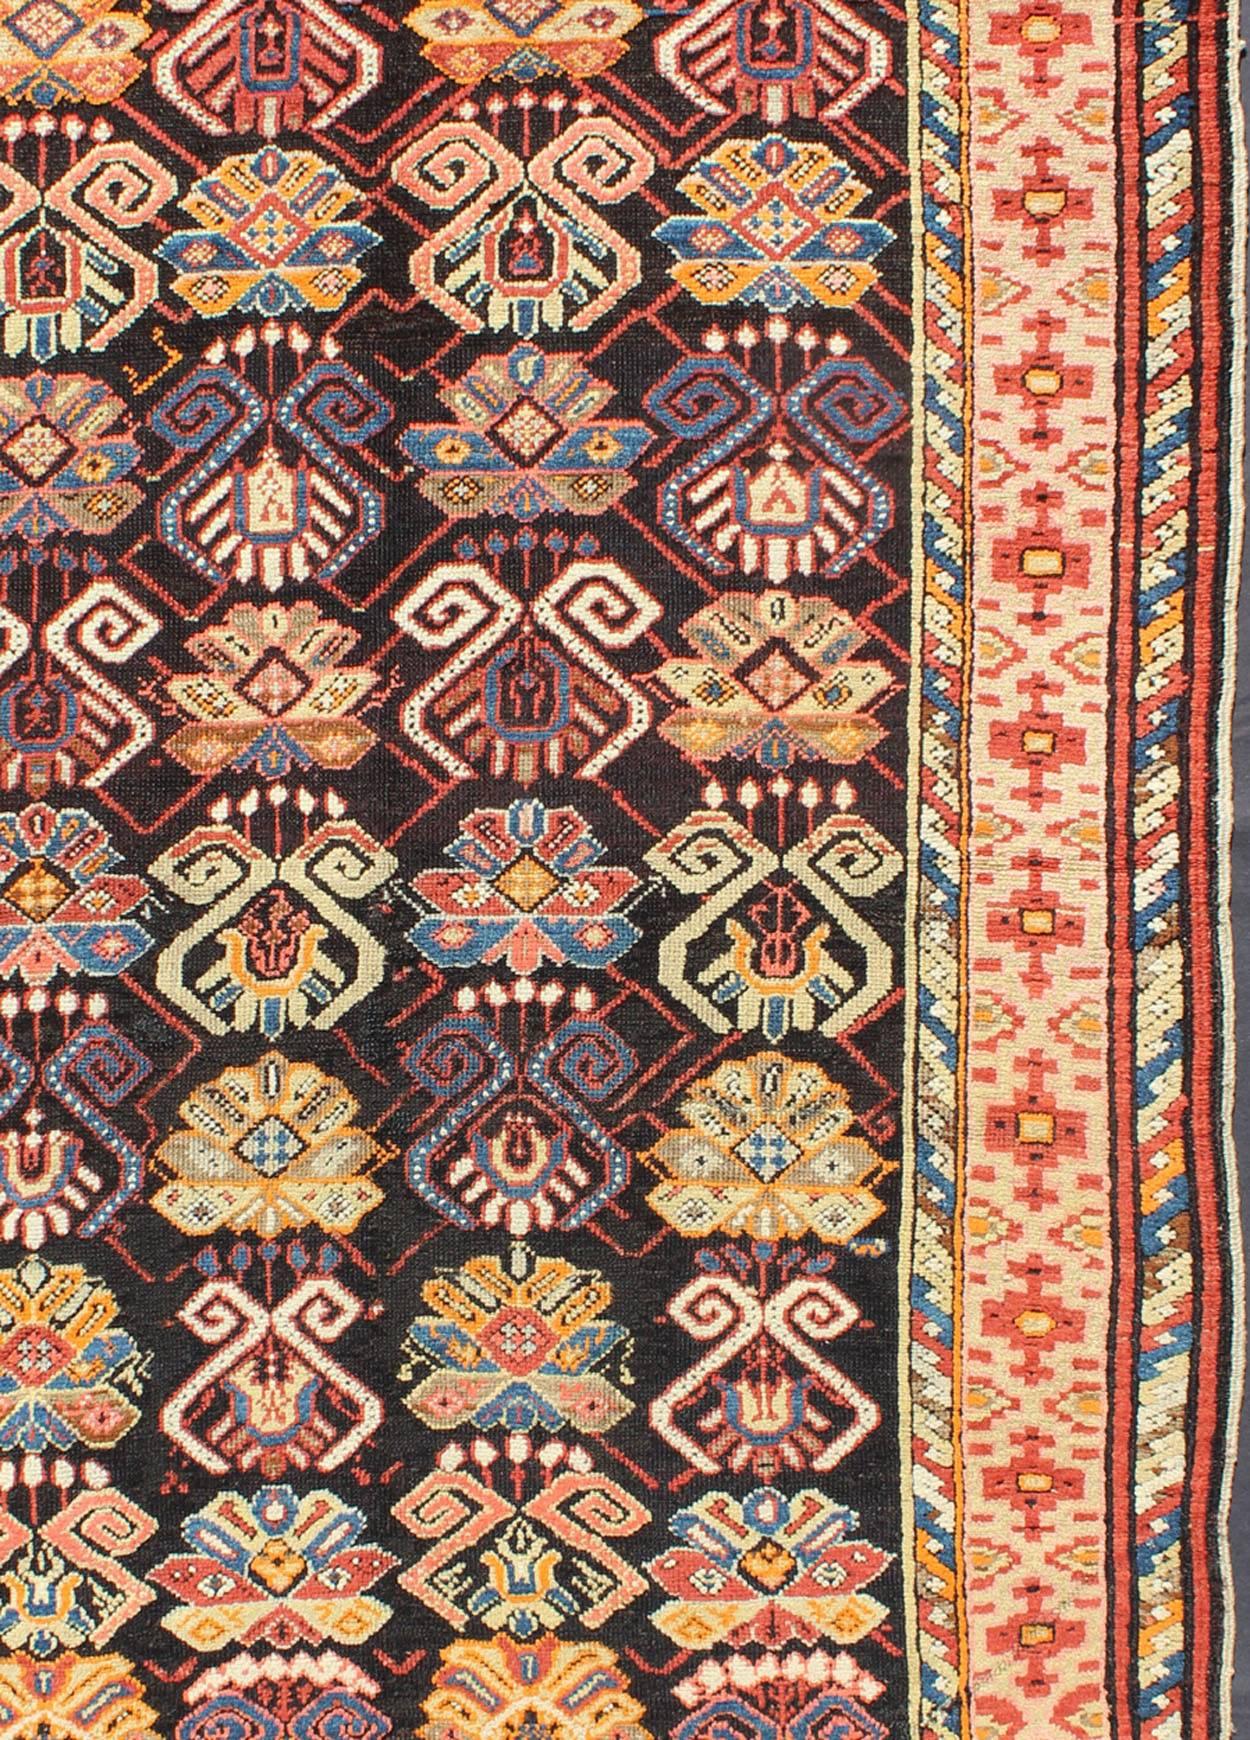 Russian Colorful Antique Caucasian Rug with All-Over Design For Sale